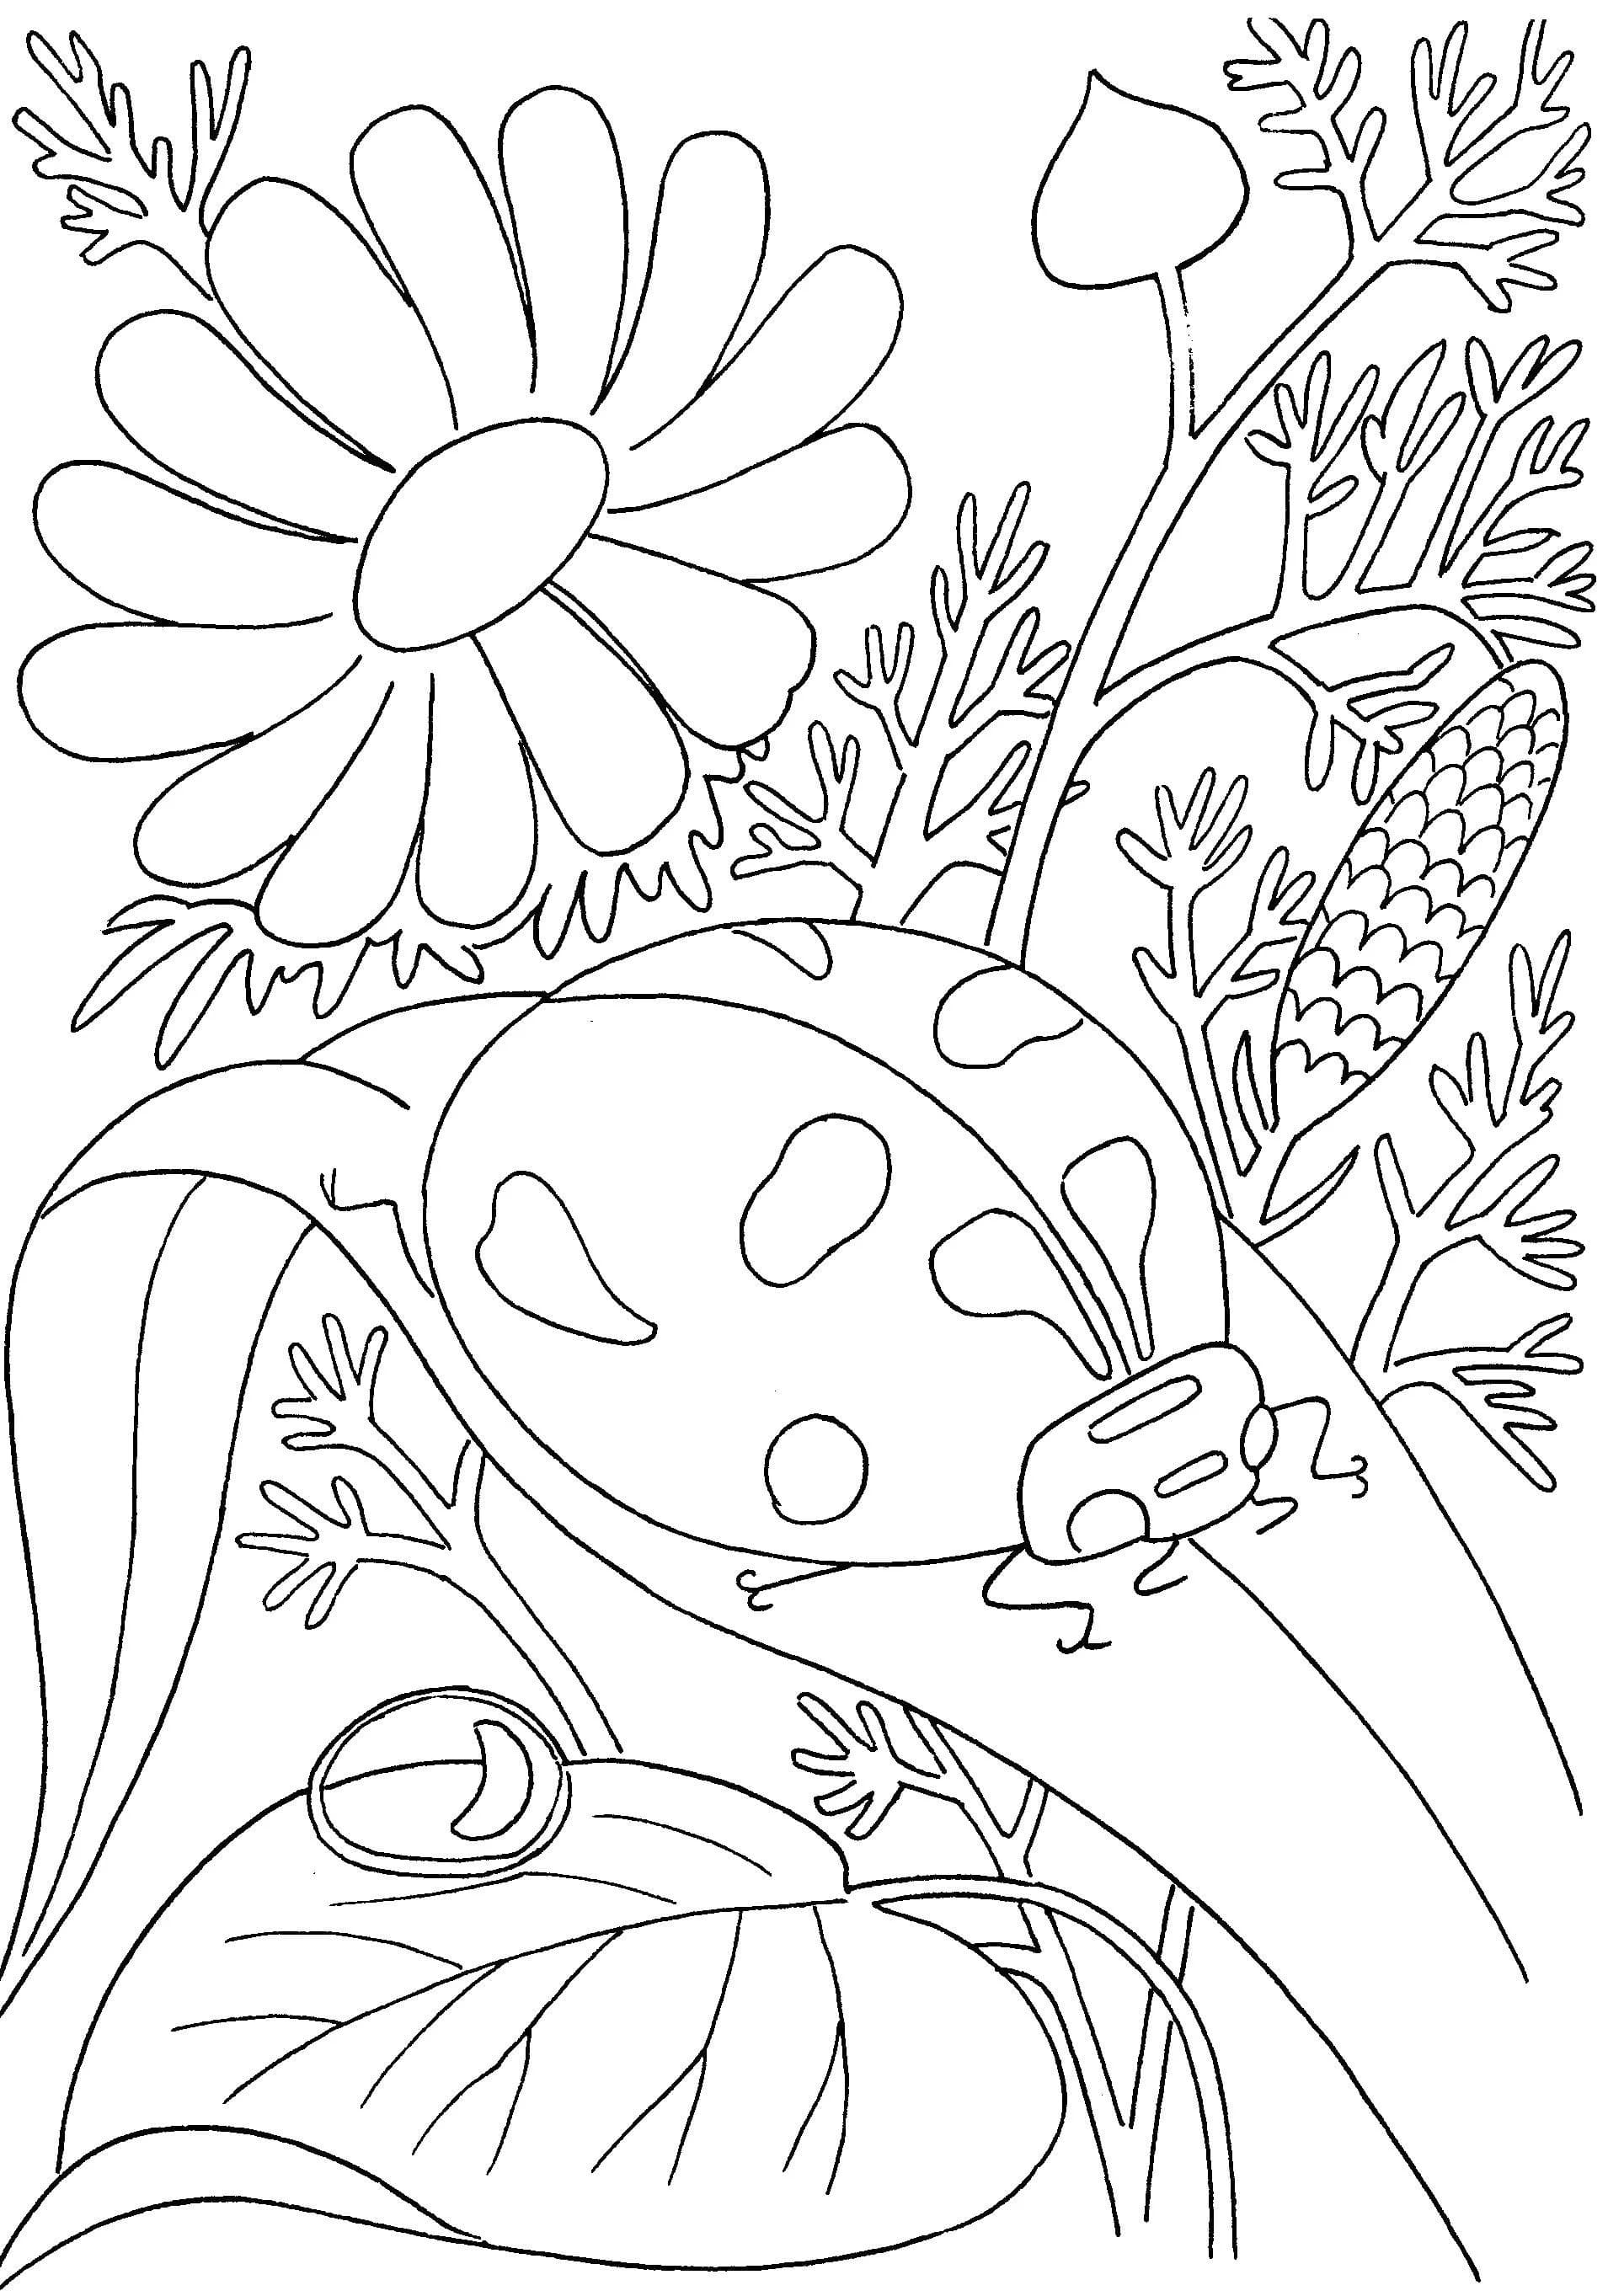 summer-coloring-pages-105-best-images-free-printable